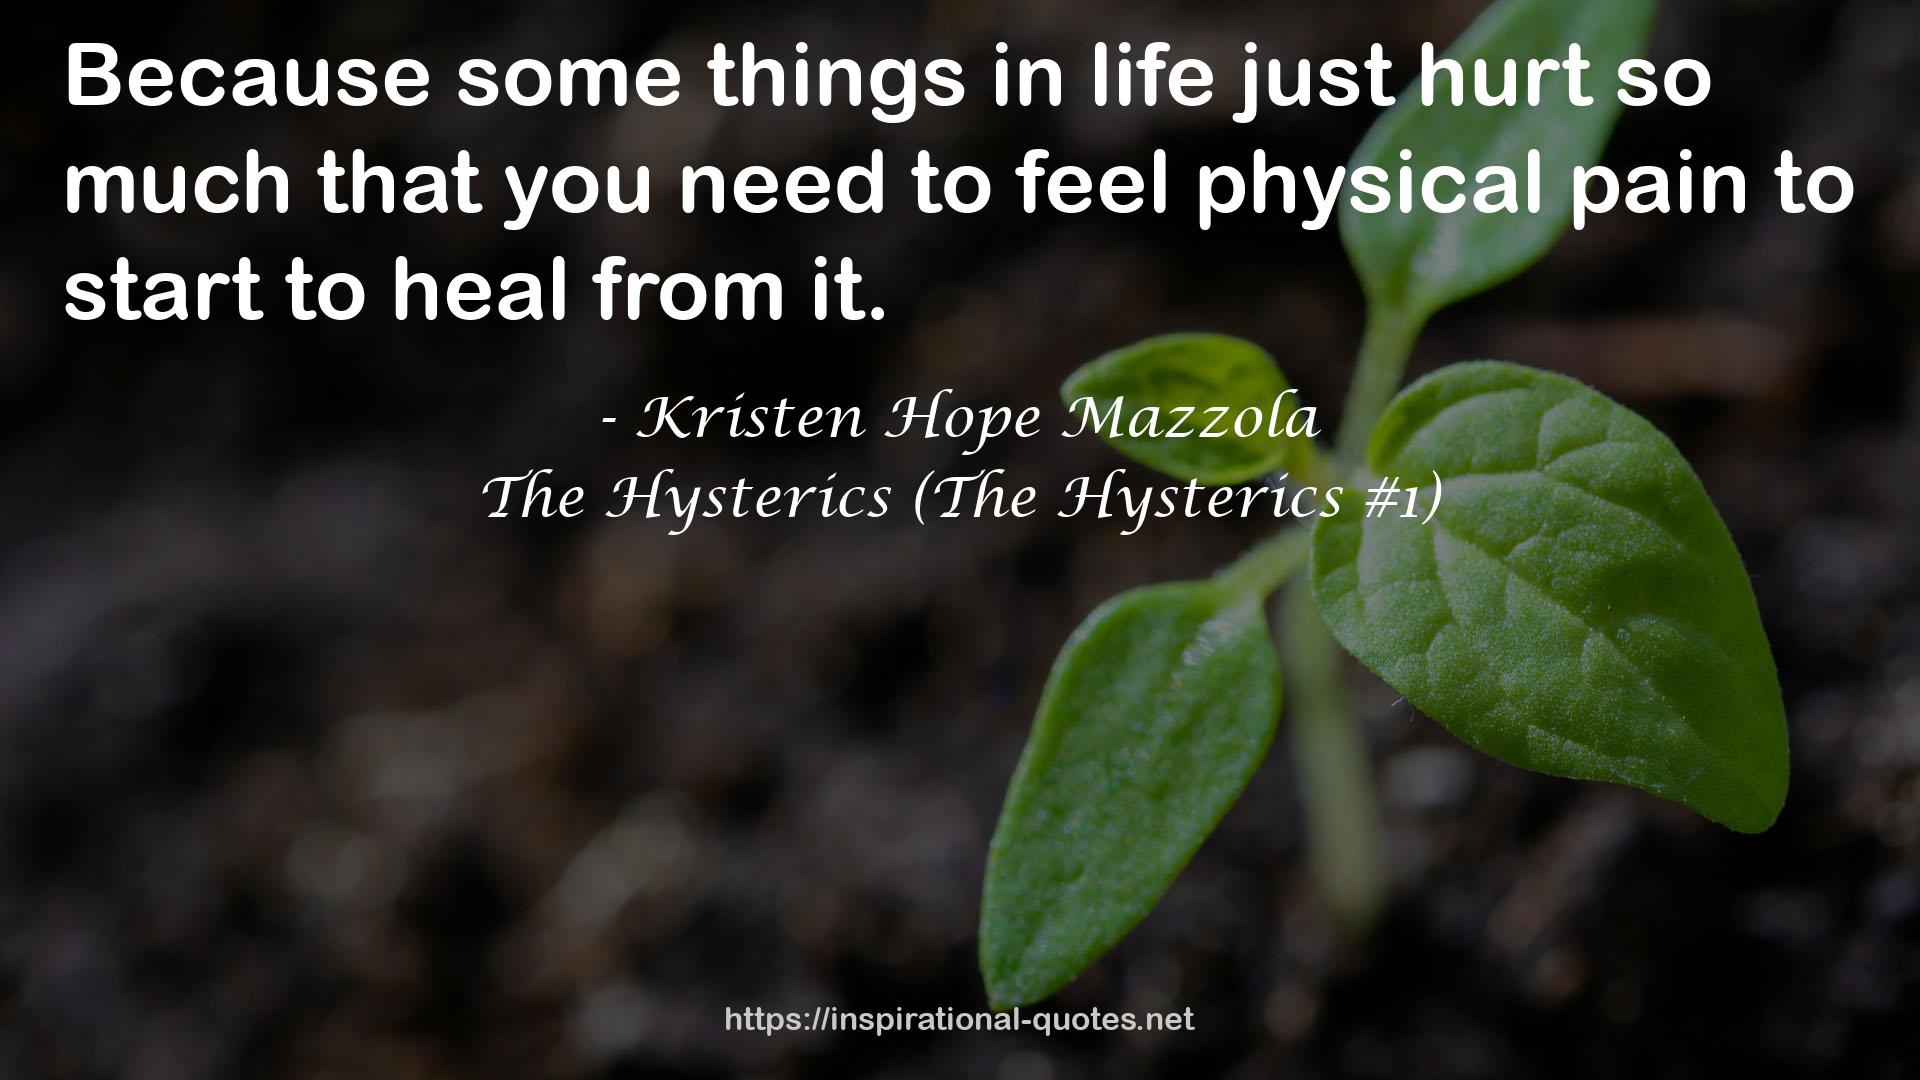 The Hysterics (The Hysterics #1) QUOTES